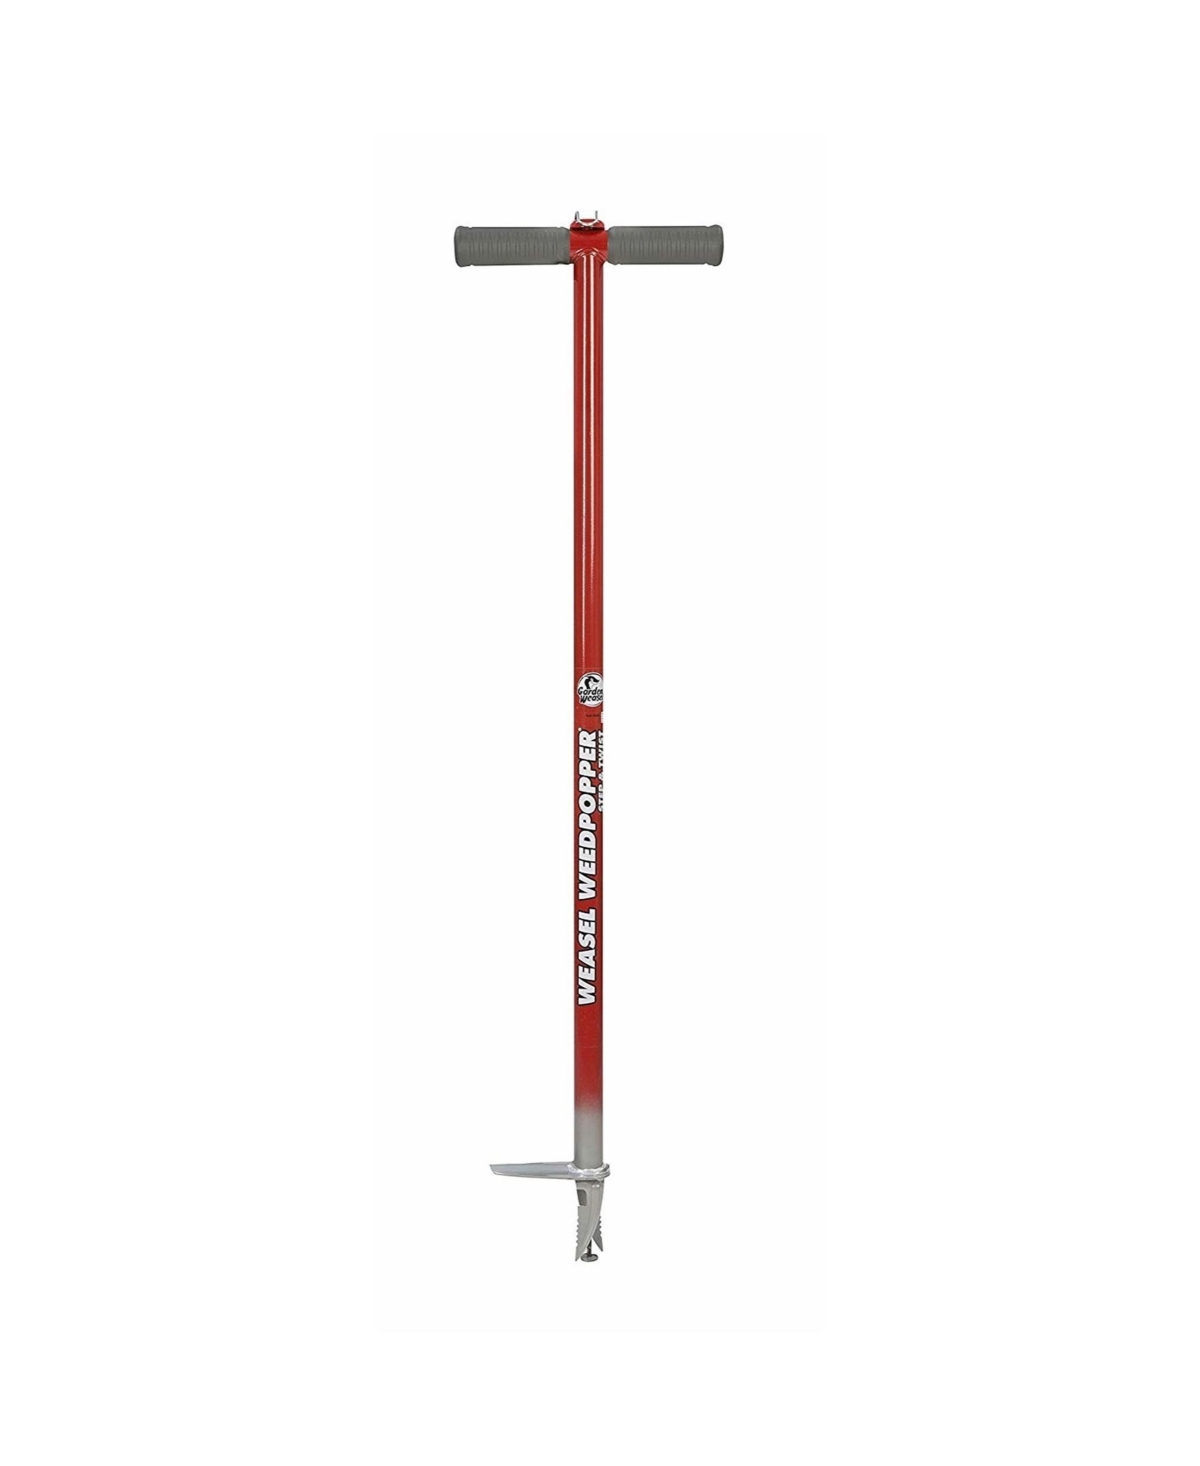 Step and Twist Hand Weeder, 36-inch long, Red & Silver - Red